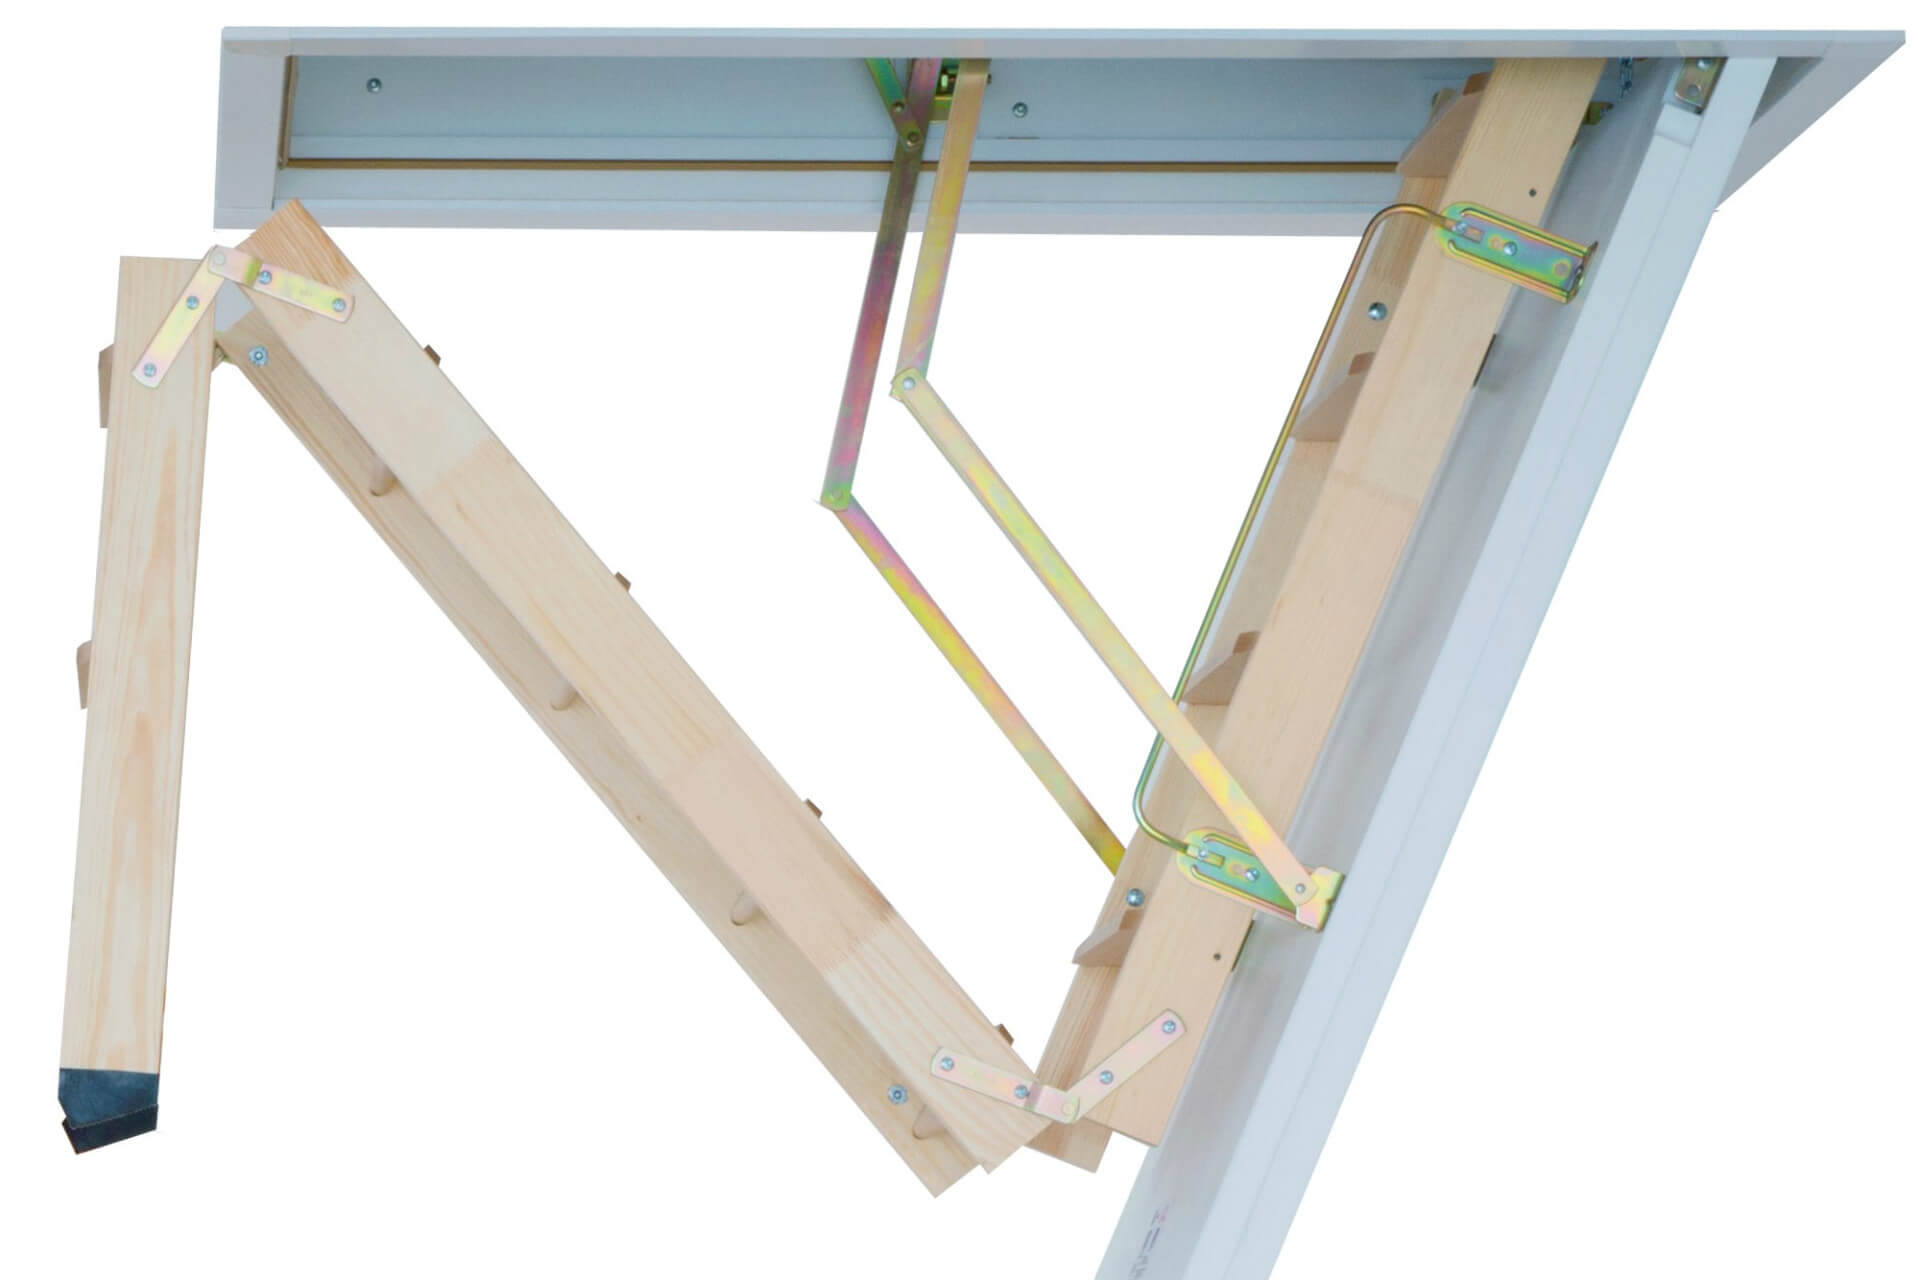 Wooden loft ladder and insulated hatch. The Cadet 3